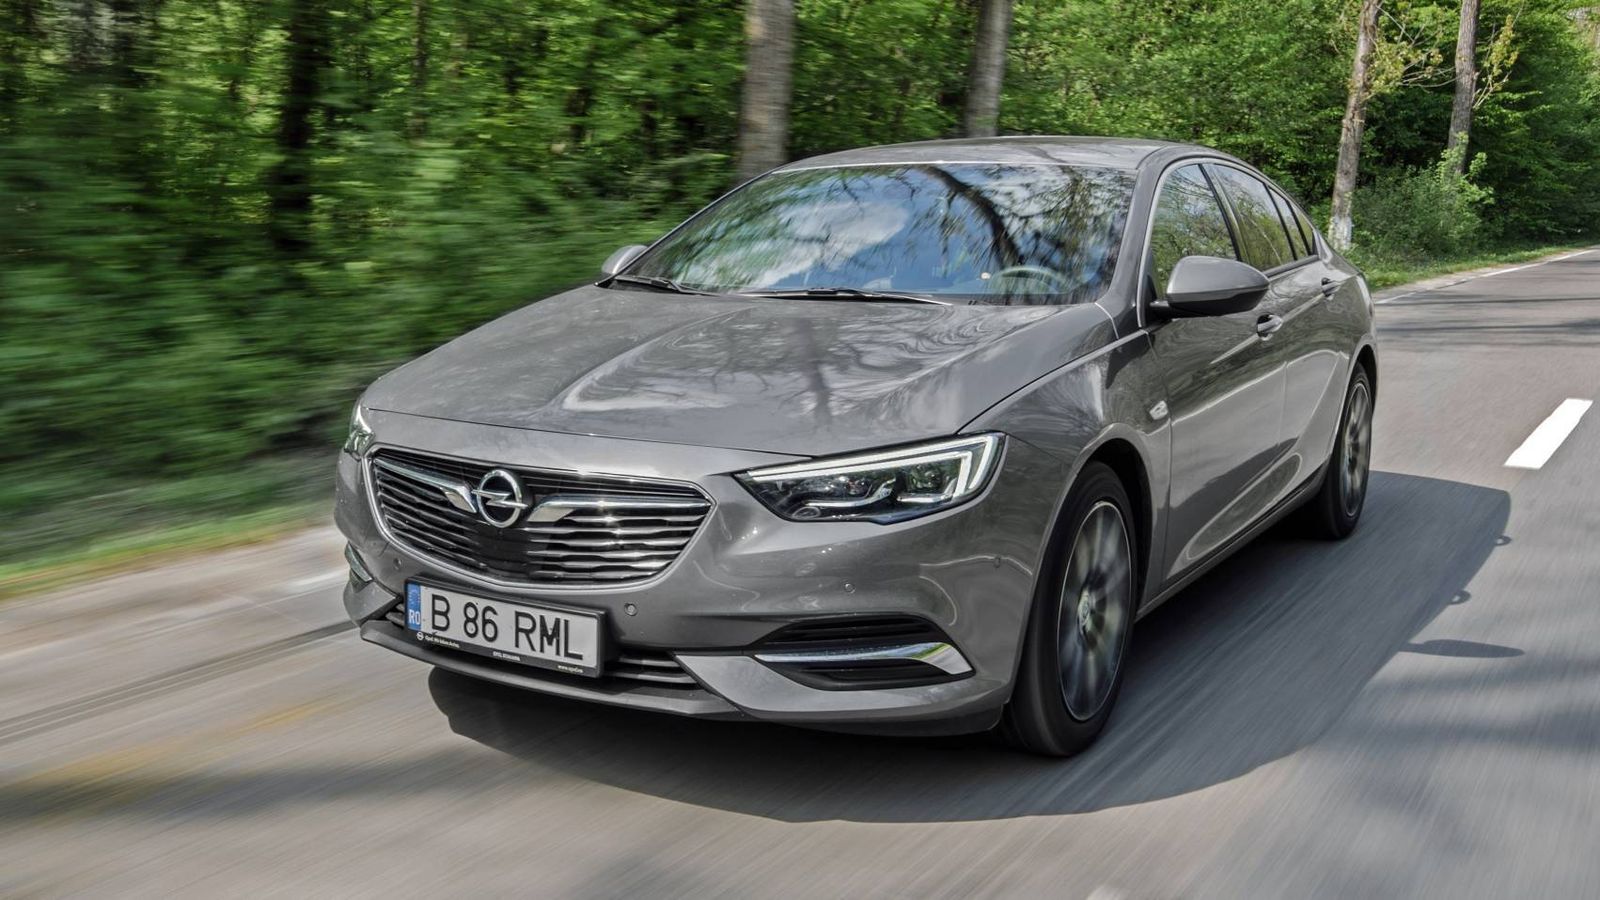 Fulfill trim Radioactive 2018 Opel Insignia Grand Sport 2.0 CDTI 170 AWD Dynamic review - Going  upscale without paying a premium | DriveMag Cars